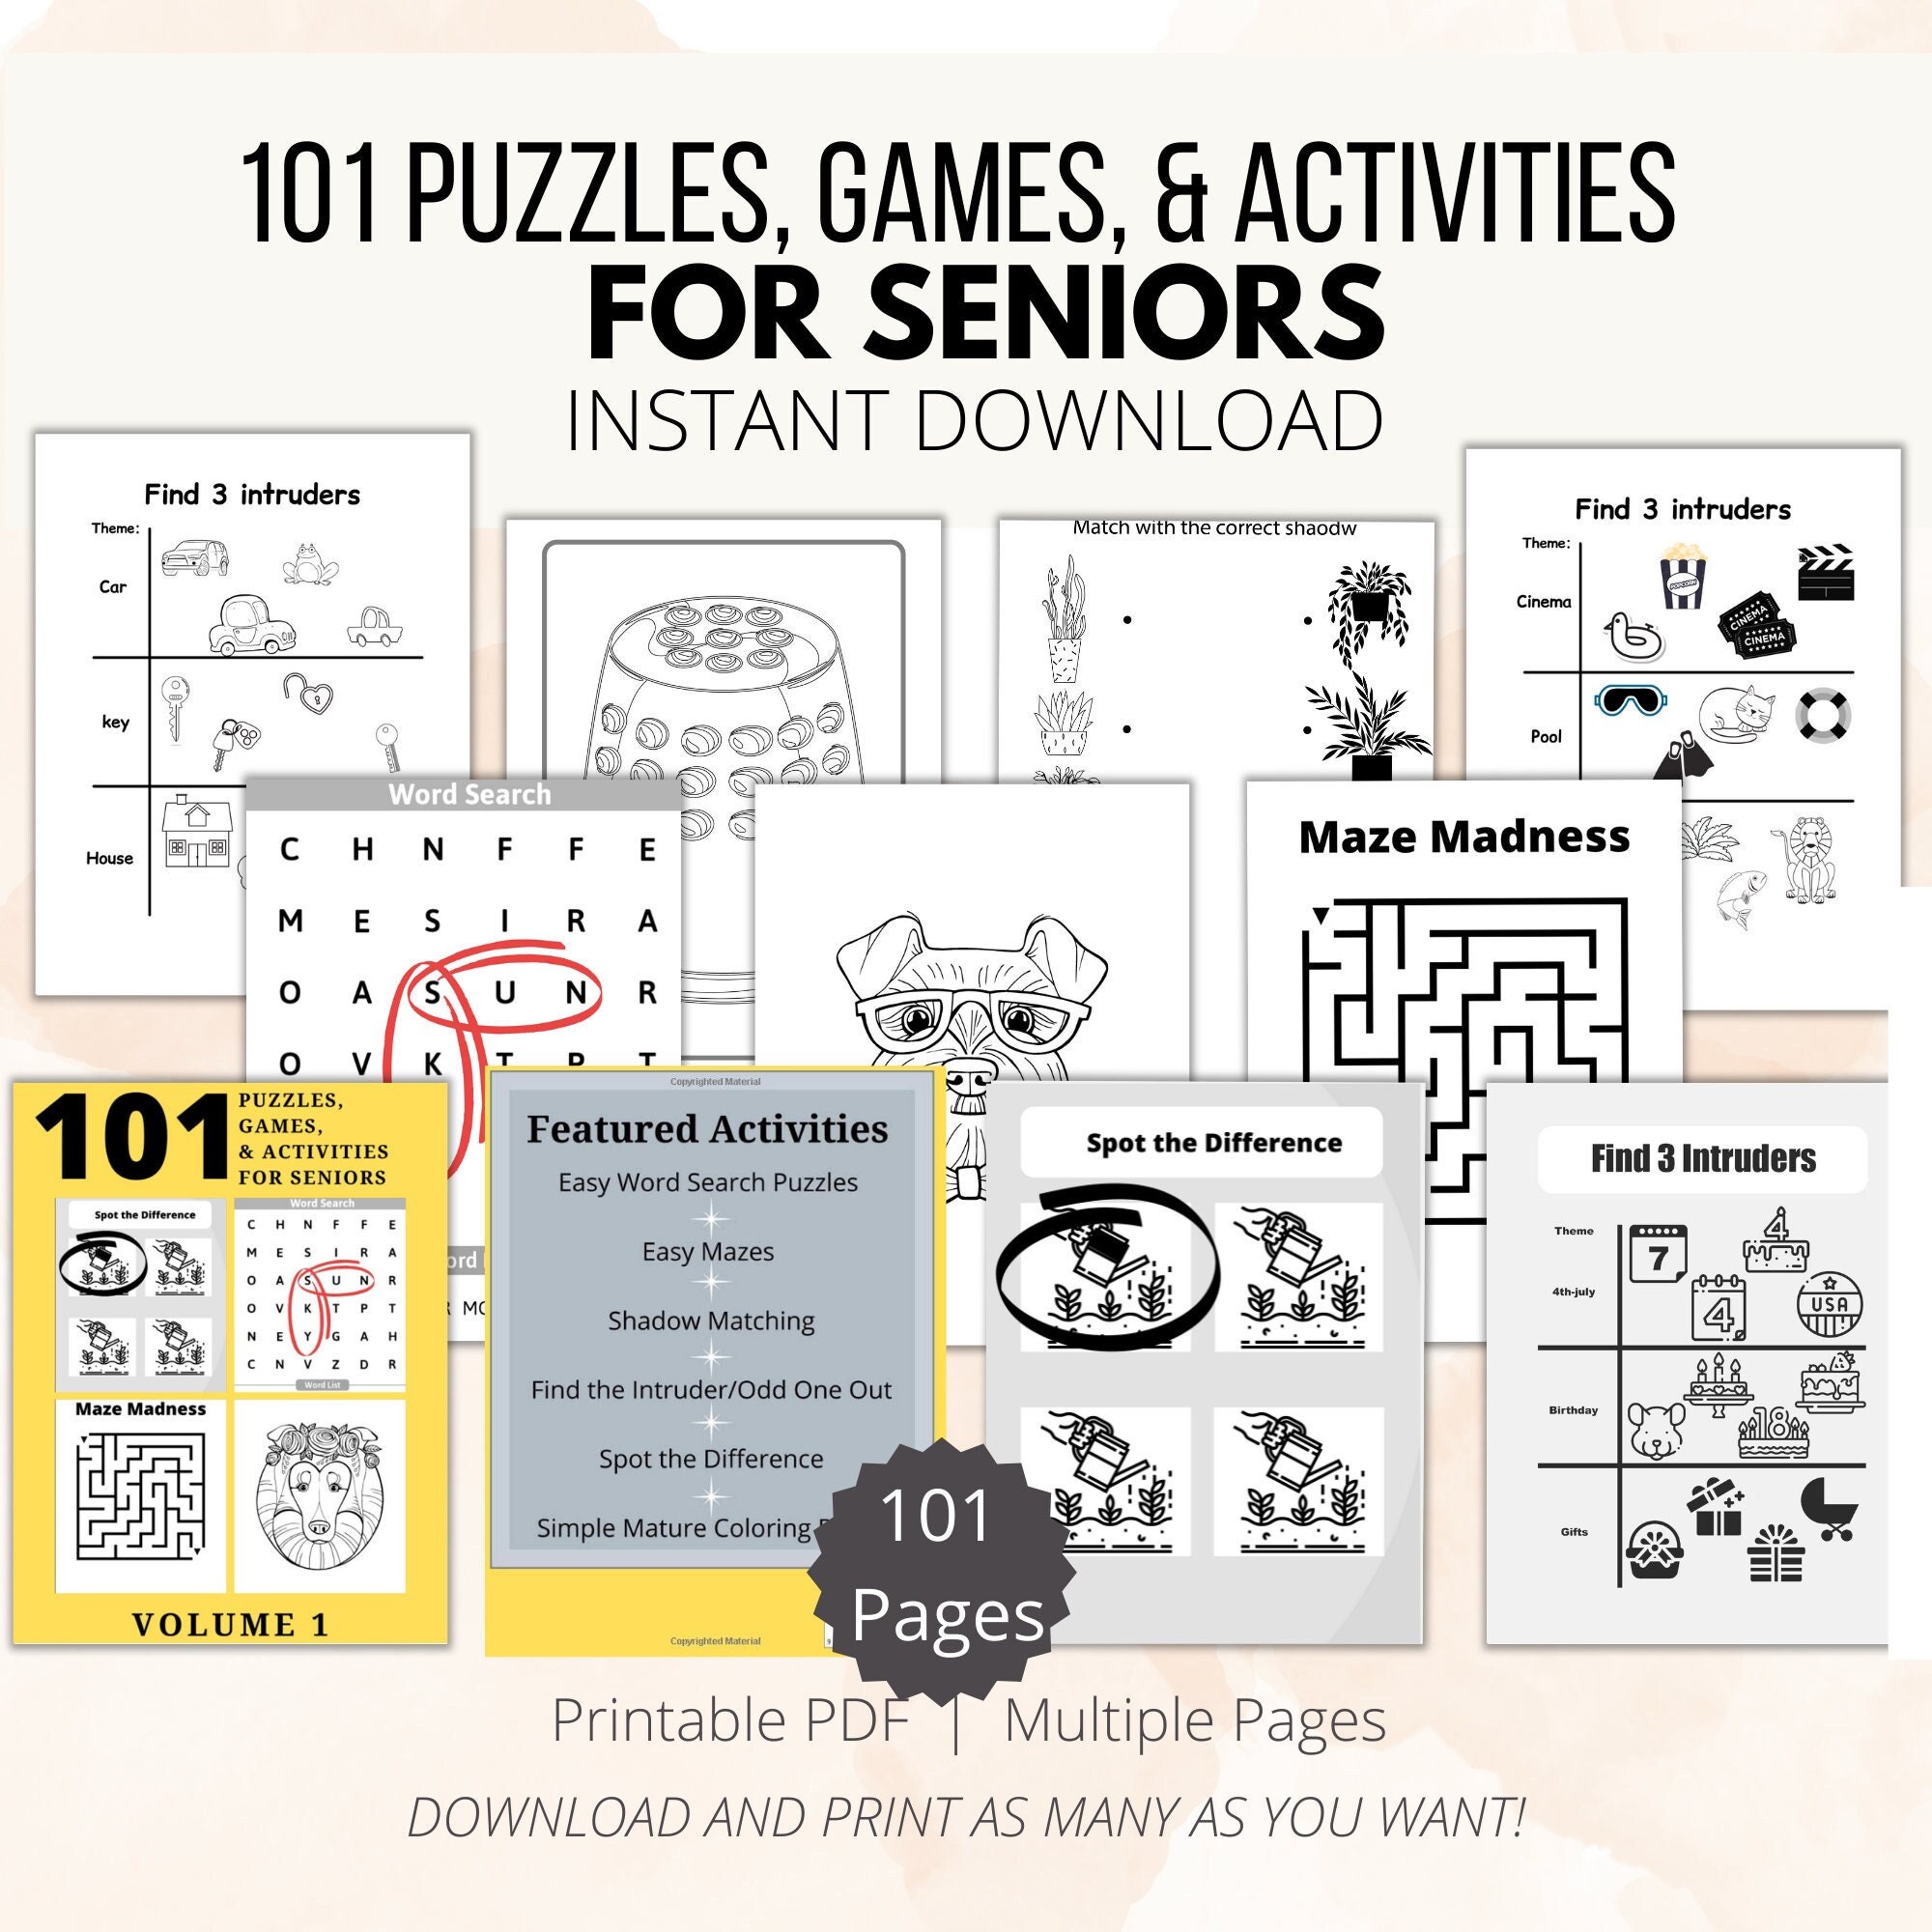 Is It Hard Or Soft? Free Games, Activities, Puzzles